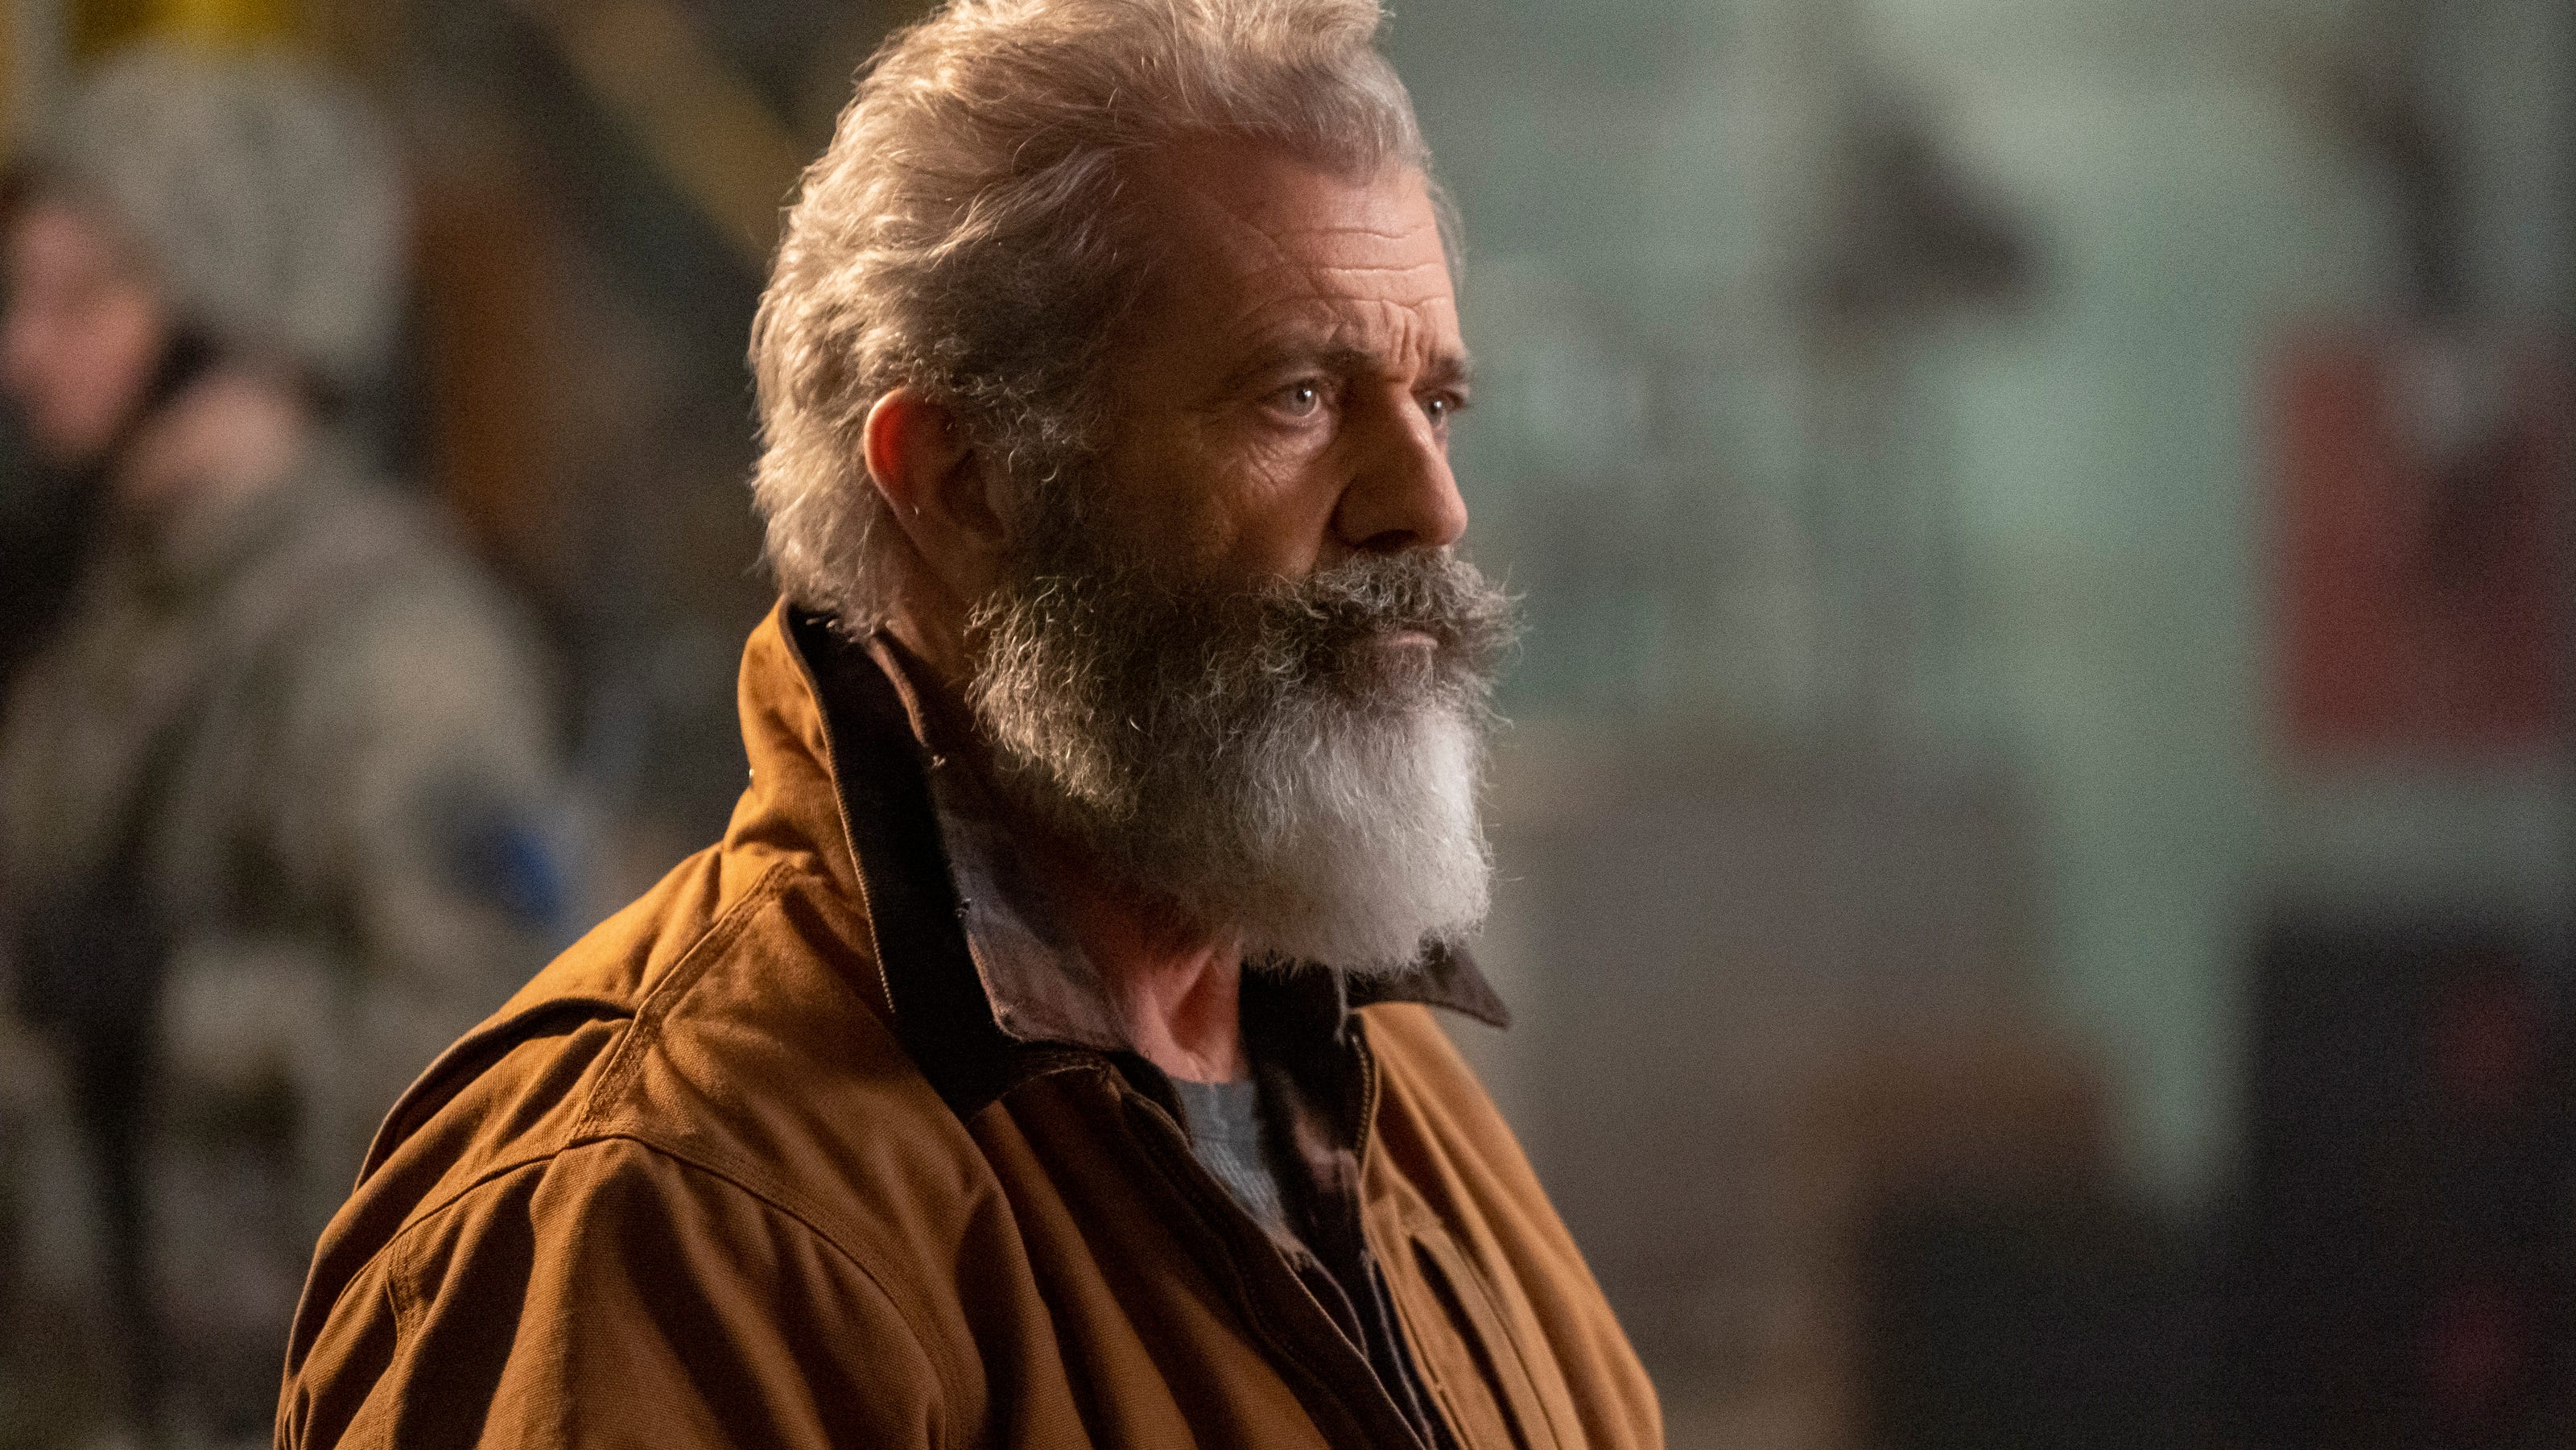 Mel Gibson's Santa Claus is marked for death in action ...